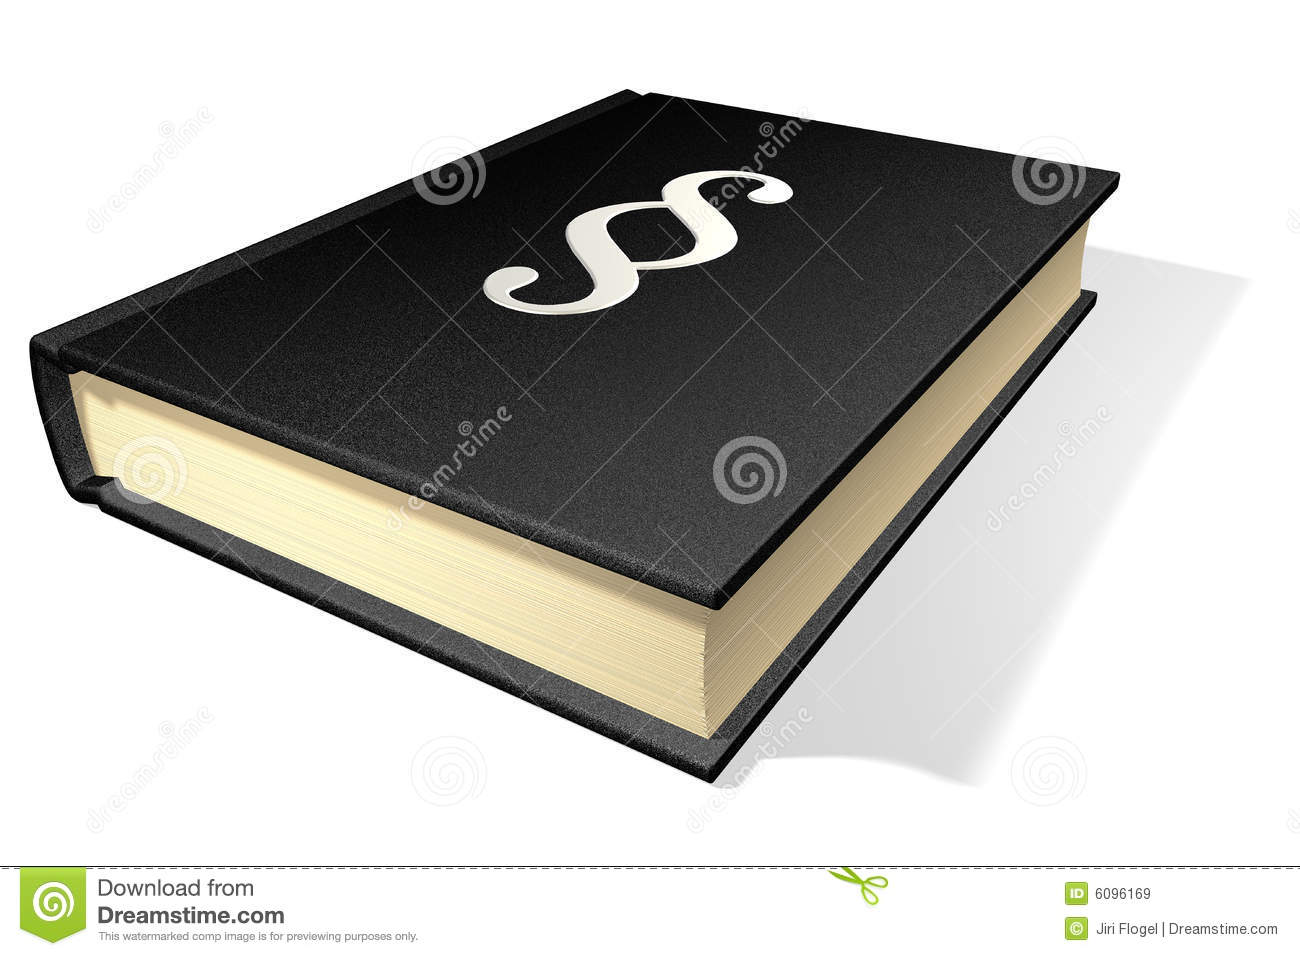 Law Book Royalty Free Stock Images   Image  6096169